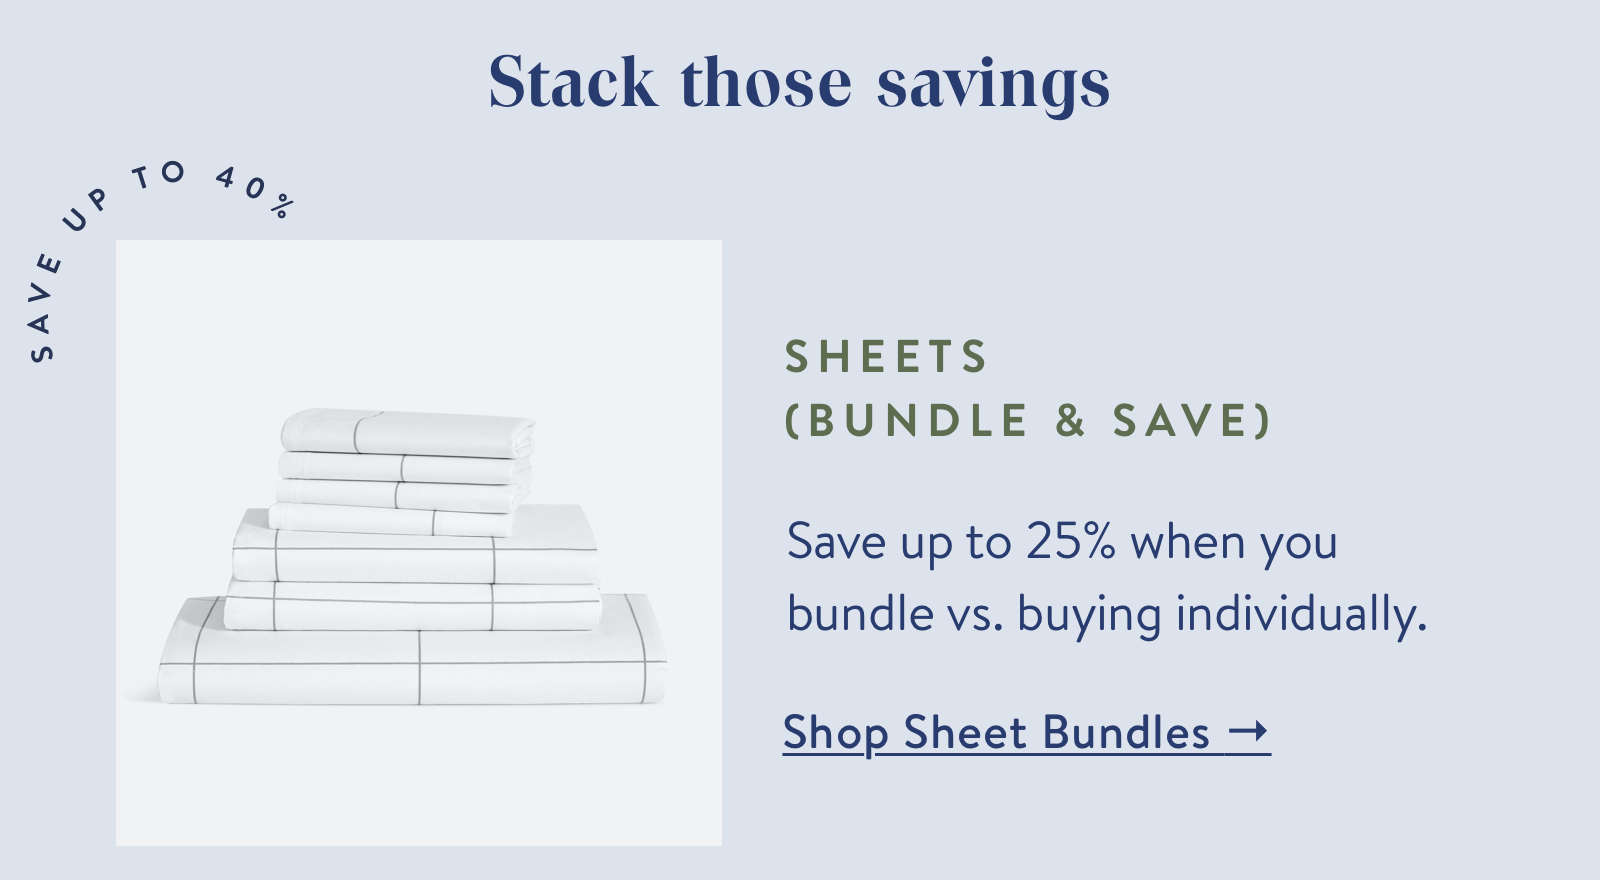 Sheets -Save up to 25% when you bundle vs. buying individually.